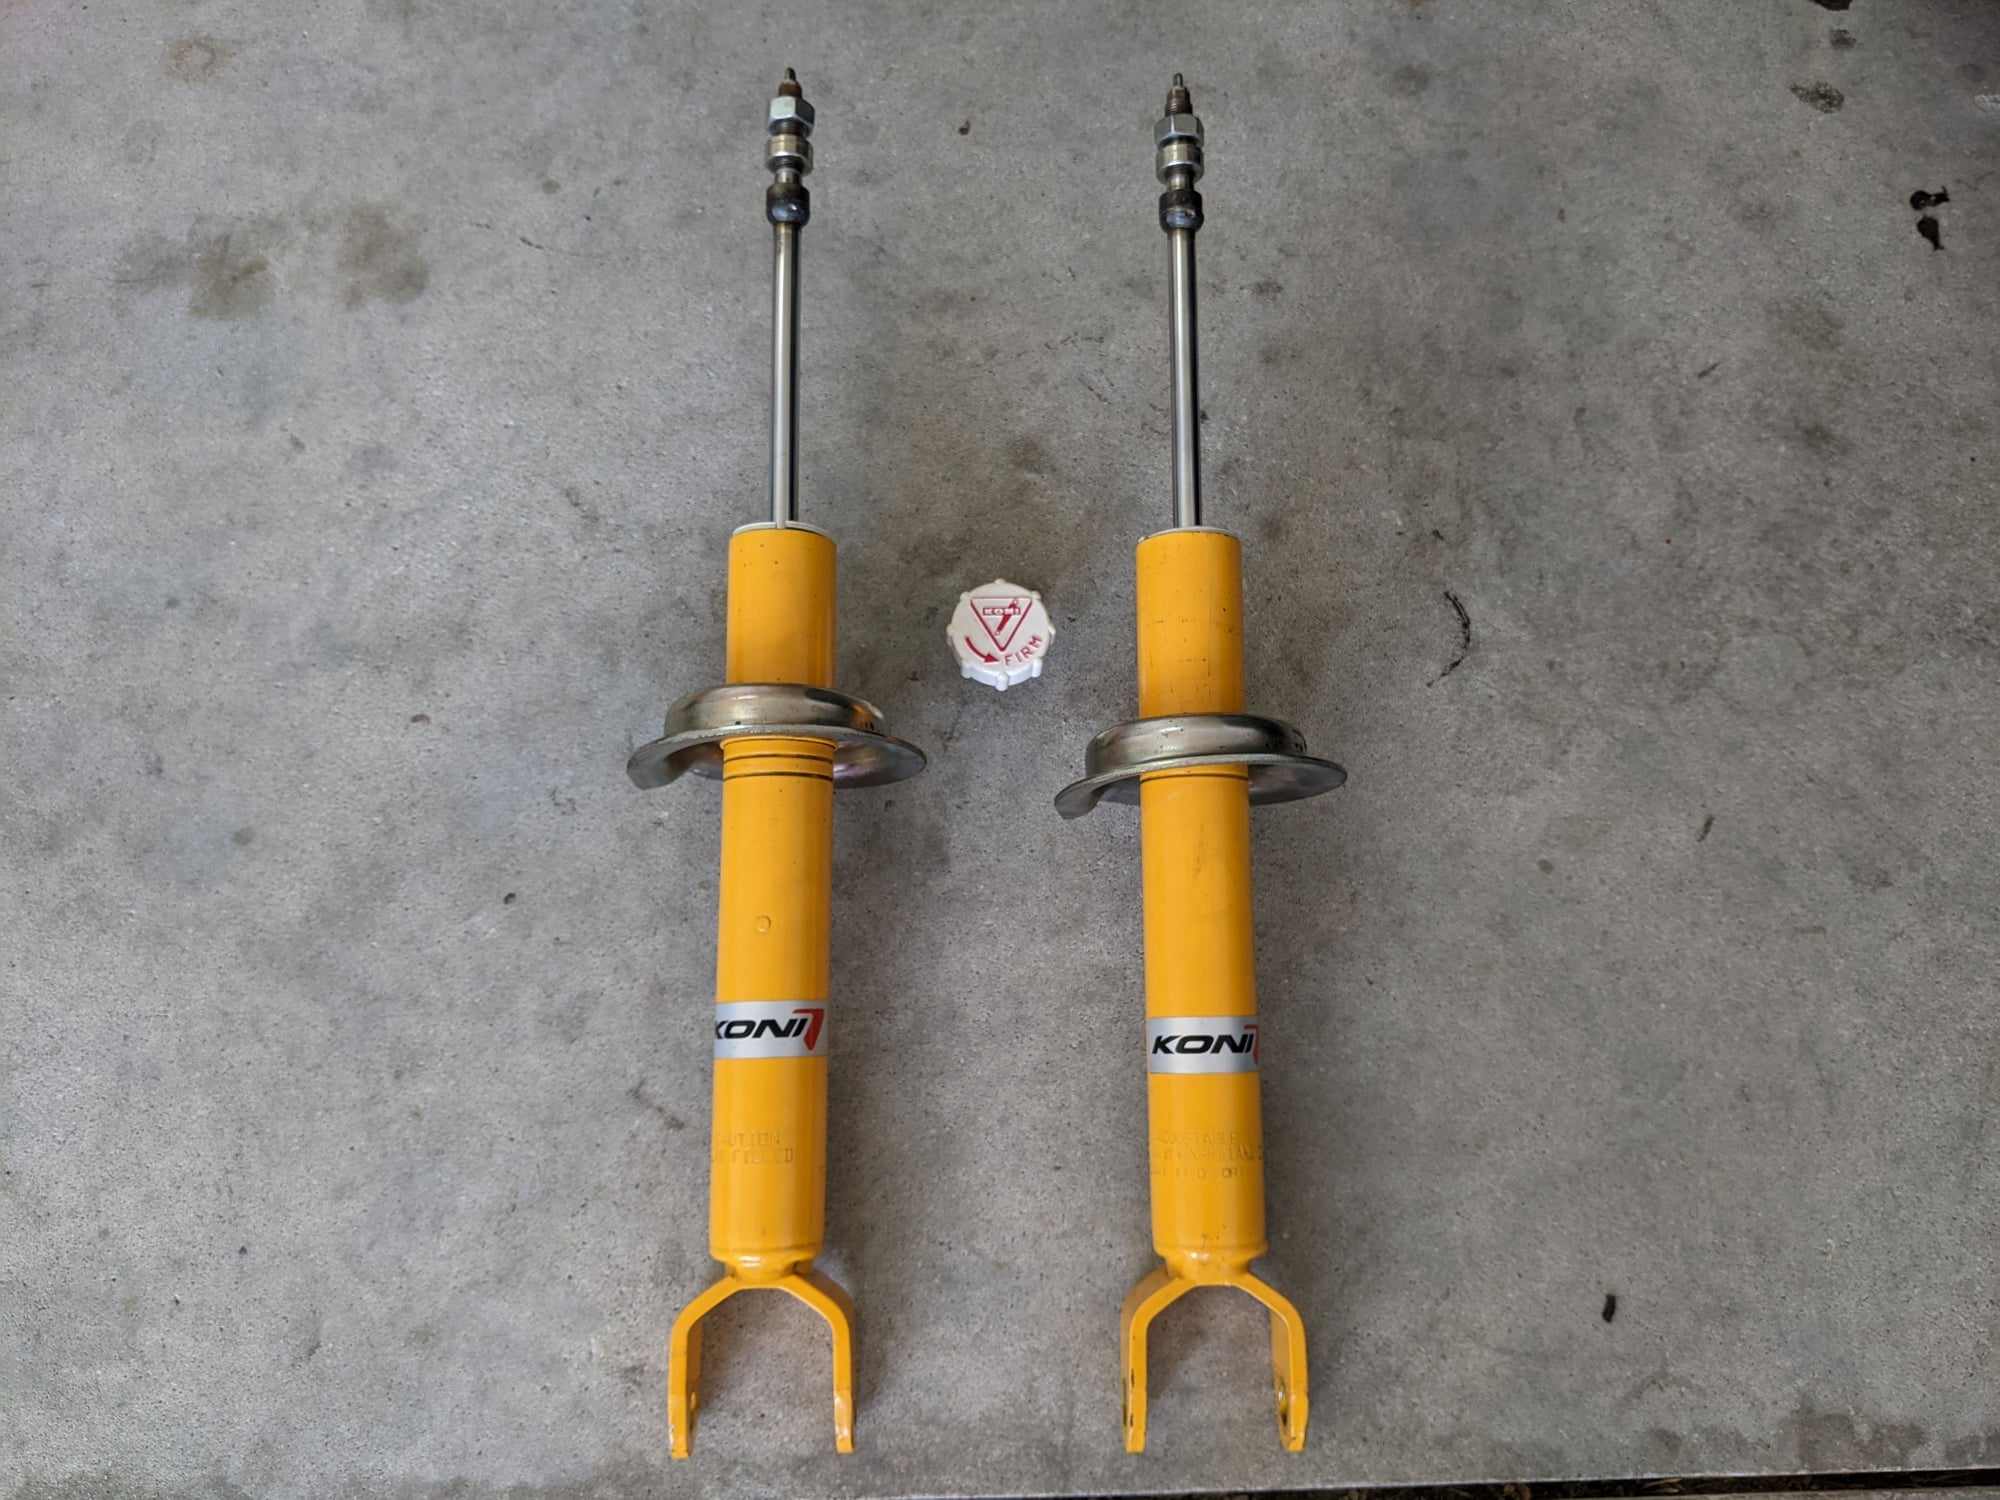 Steering/Suspension - Koni Shocks and H&R Springs - Used - 1993 to 1995 Mazda RX-7 - Melbourne, FL 32940, United States